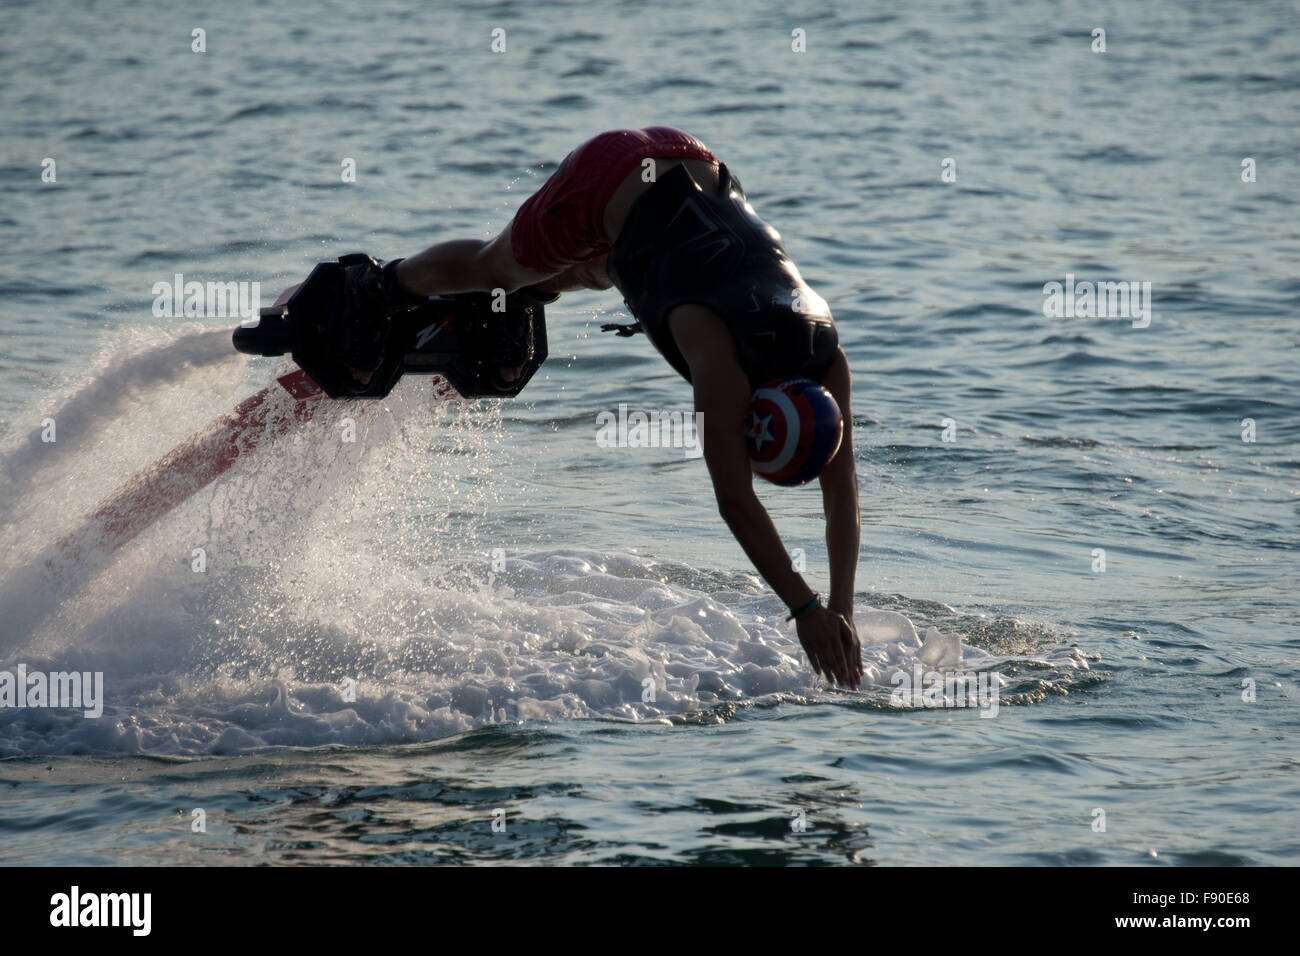 Flyboarder in silhouette diving into calm sea Stock Photo